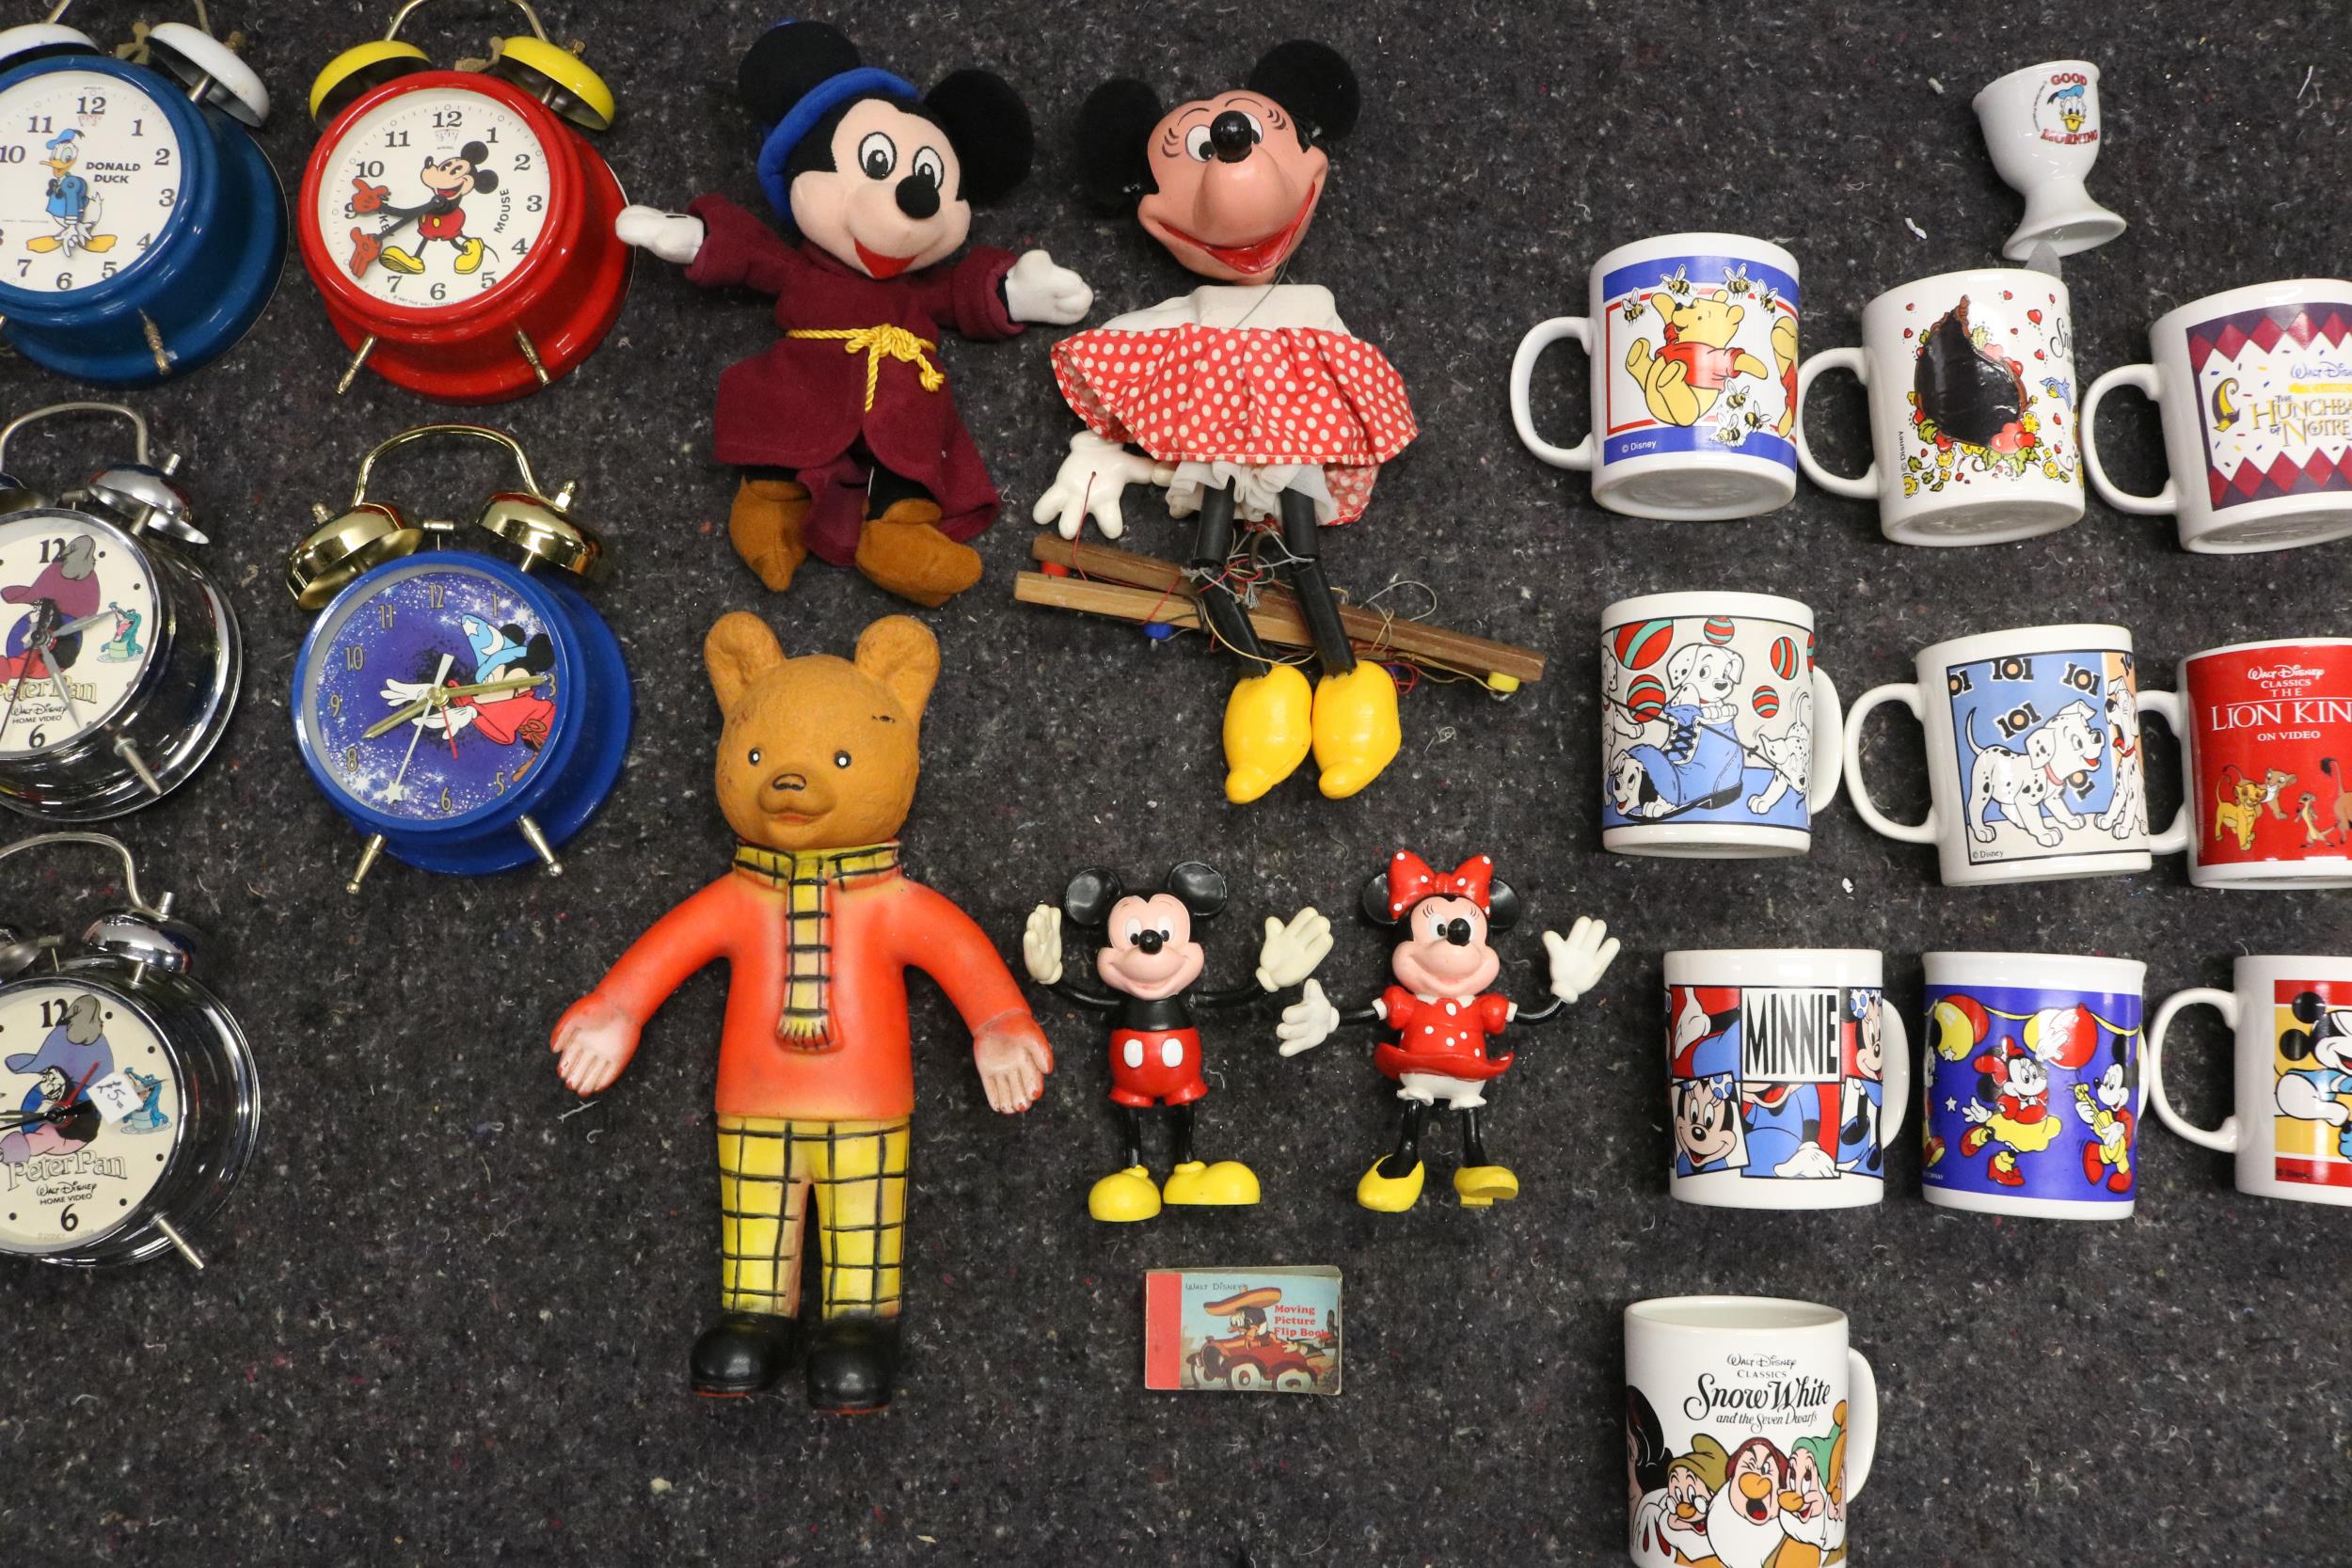 Large Collection Of Items Relating To Disney, Including 8 Vintage Alarm Clocks - Image 3 of 5